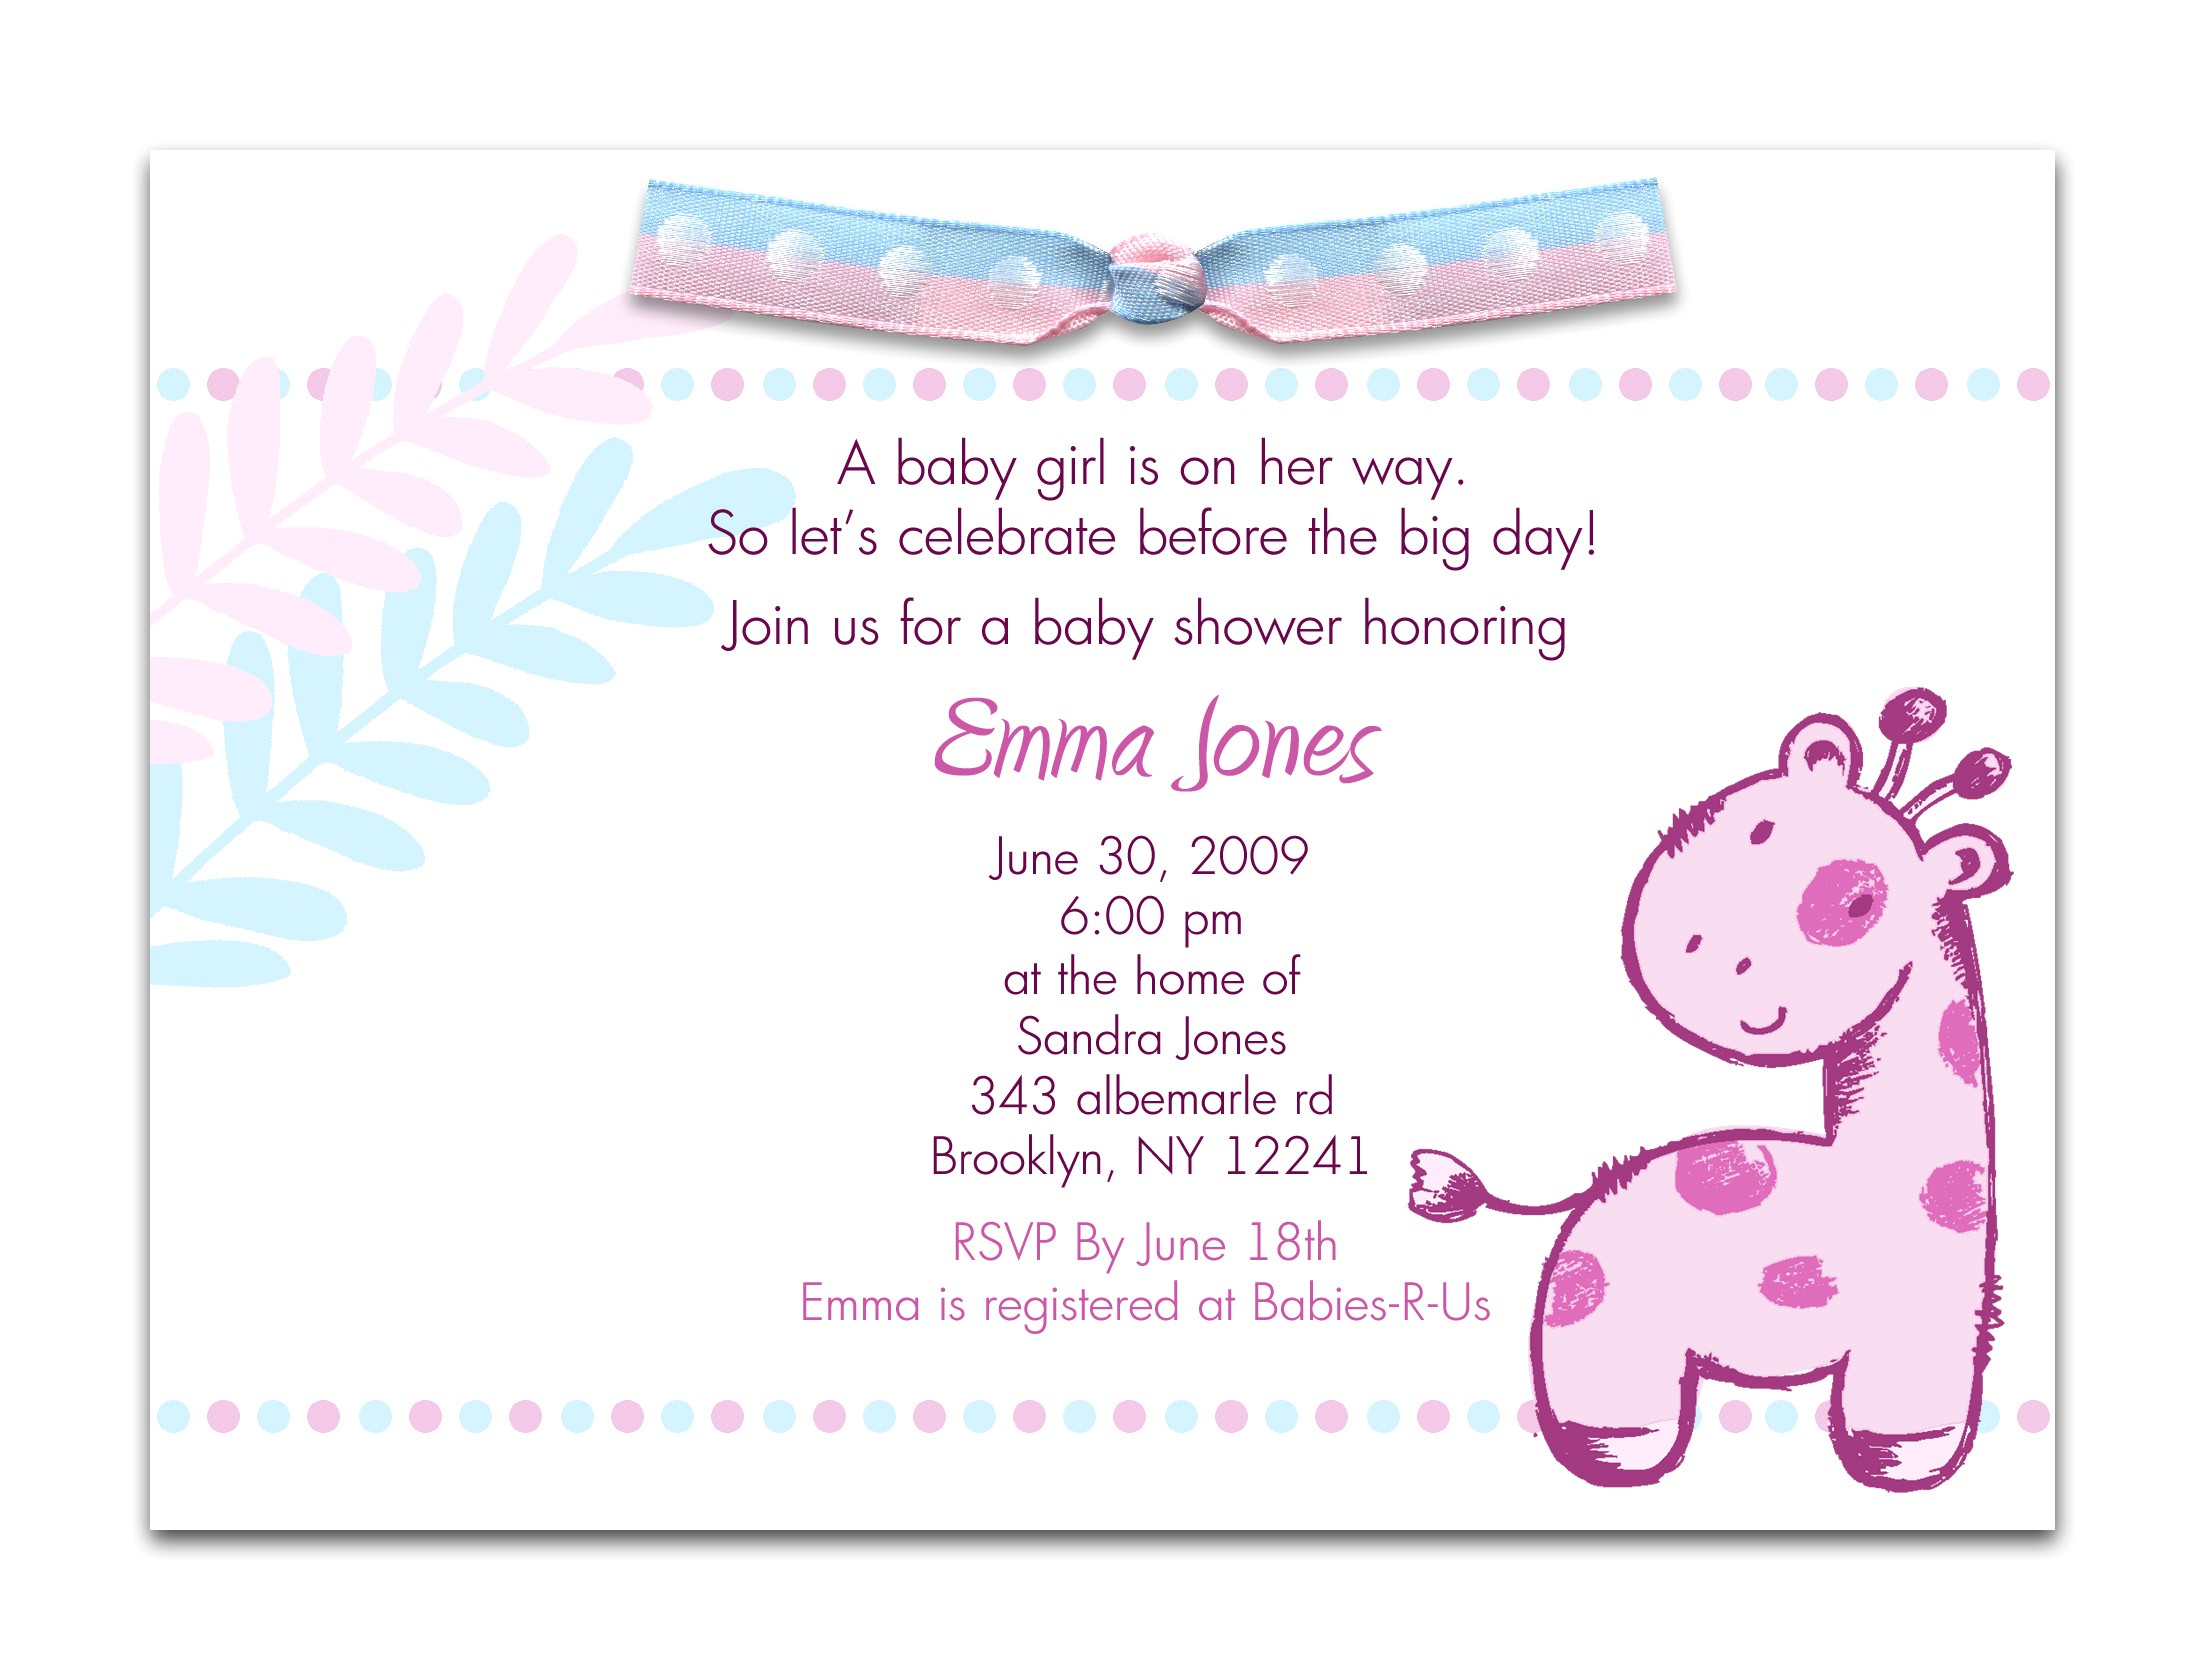 Sample Wording for Baby Shower Invitations Baby Shower Invitation Wording for A Girl